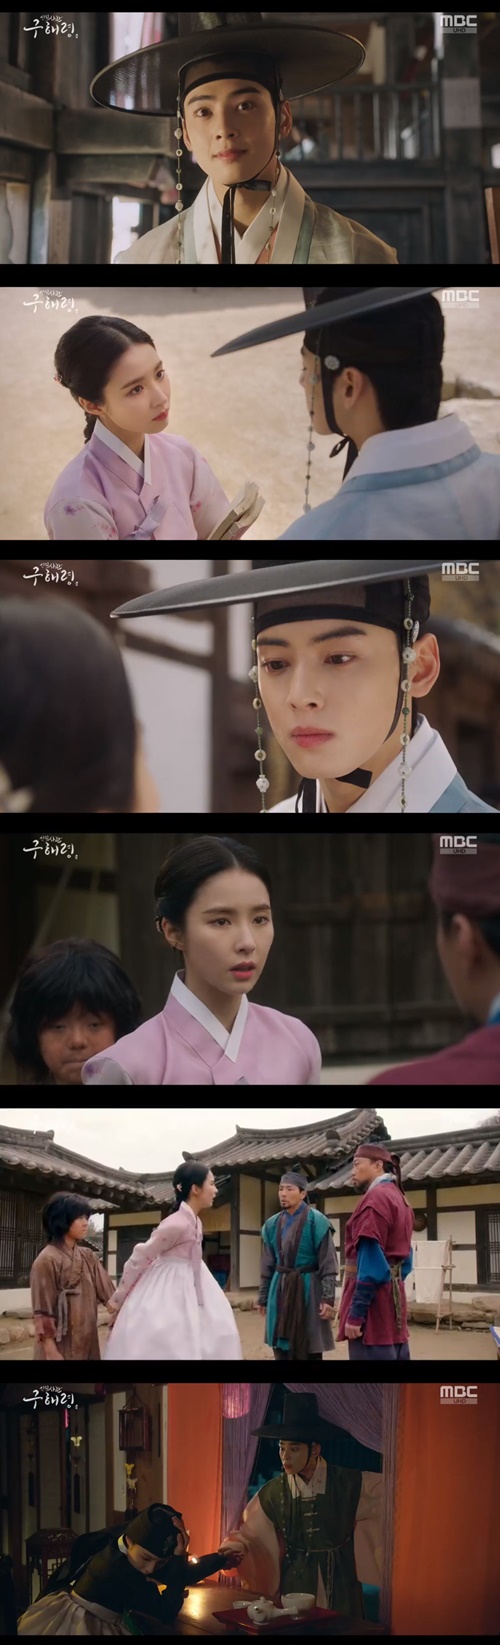 Newcomer Rookie Historian Goo Hae-ryung Shin Se-kyung and Cha Eun-woo began to know each others existence in a chance meeting.On the first episode of New Entrance Officer Rookie Historian Goo Hae-ryung on the 17th, the first meeting between Rookie Historian Goo Hae-ryung (Shin Se-kyung) and Irim (Cha Eun-woo) was drawn.Rookie Historian Goo Hae-ryung was a pleasure in life to read books.I read the coalition novel Boys Special Conflict (Sorry of Young Werther) in front of the yangban house, and I was kicked out because of the ending that did not fit the taste of the gyusu, but I did not feel nervous.I will go to another house and say, I will save it with a dirty and ugly book.One day Rookie Historian Goo Hae-ryung, who was pickpocketed, chased the child who ran away with his own things.Three men used violence as this child tried to enter the house, and Rookie Historian Goo Hae-ryung could not stand it.I finally went into the house and said, I did not steal my child, so I did not even have a hand, and then I was a mans book.Then, the head of the walja-pae (Lee Jong-hyuk) appeared and said, This child is my novi, my heart is baked or boiled.Heo Sam-bo (Sung Ji-ru) found people dating in the corner of the palace. Unlike Husambo, who was trying to shout, Lee Lim, who suddenly appeared, said, Is it so good?I want to keep my life and protect it. In response to the answer, I am so good that my life is not too bad, Irim suddenly grabbed a brush and asked me to tell me all the processes from the first meeting to love.Irim was a love novel who acted as a pseudonym Plum, and he found his lover and could not pass by curiosity.Irim, who wanted to make sure people really liked his novel, went out of the palace, and was very pleased to see many people enjoying his novel.Irim, who went to a bookstore, found Rookie Historian Goo Hae-ryung reading a book, and approached Rookie Historian Goo Hae-ryung as if he was attracted to something.Irim asked Rookie Historian Goo Hae-ryung, Why dont you like Plum books?Rookie Historian Goo Hae-ryung then asked, Do you have to like it? And then he said, What scholar teaches you to put a horse in the first place.The gorgeous Irim said, How do you not like Plum books? And Rookie Historian Goo Hae-ryung said, There is nothing right.I do not have a problem to put this thing out to the world to make a few money. The two were later reunited as chance; Rookie Historian Goo Hae-ryung, who was asked by the waltze boss to pretend to be Plum for one day.He played Lee Lim and played a fan meeting, and Irim came to face it as he found this place.Irim was also surprised when he approached the person who pretended to be Rookie Historian Goo Hae-ryung.Cha Eun-woo showed excitement as soon as she first saw Shin Se-kyung - but the episode then led to a different atmosphere from the first impression.Shin Se-kyung suddenly opened his mouth and yawned to hesitate Cha Eun-woo, and he was caught pretending to be Cha Eun-woo.He also put the nuance directive to Cha Eun-woo that Plums novel is poor.Shin Se-kyungs candid words and actions, and on the other hand, careful Cha Eun-woos character and rapid development made me more curious.Photo MBC broadcast screen capture